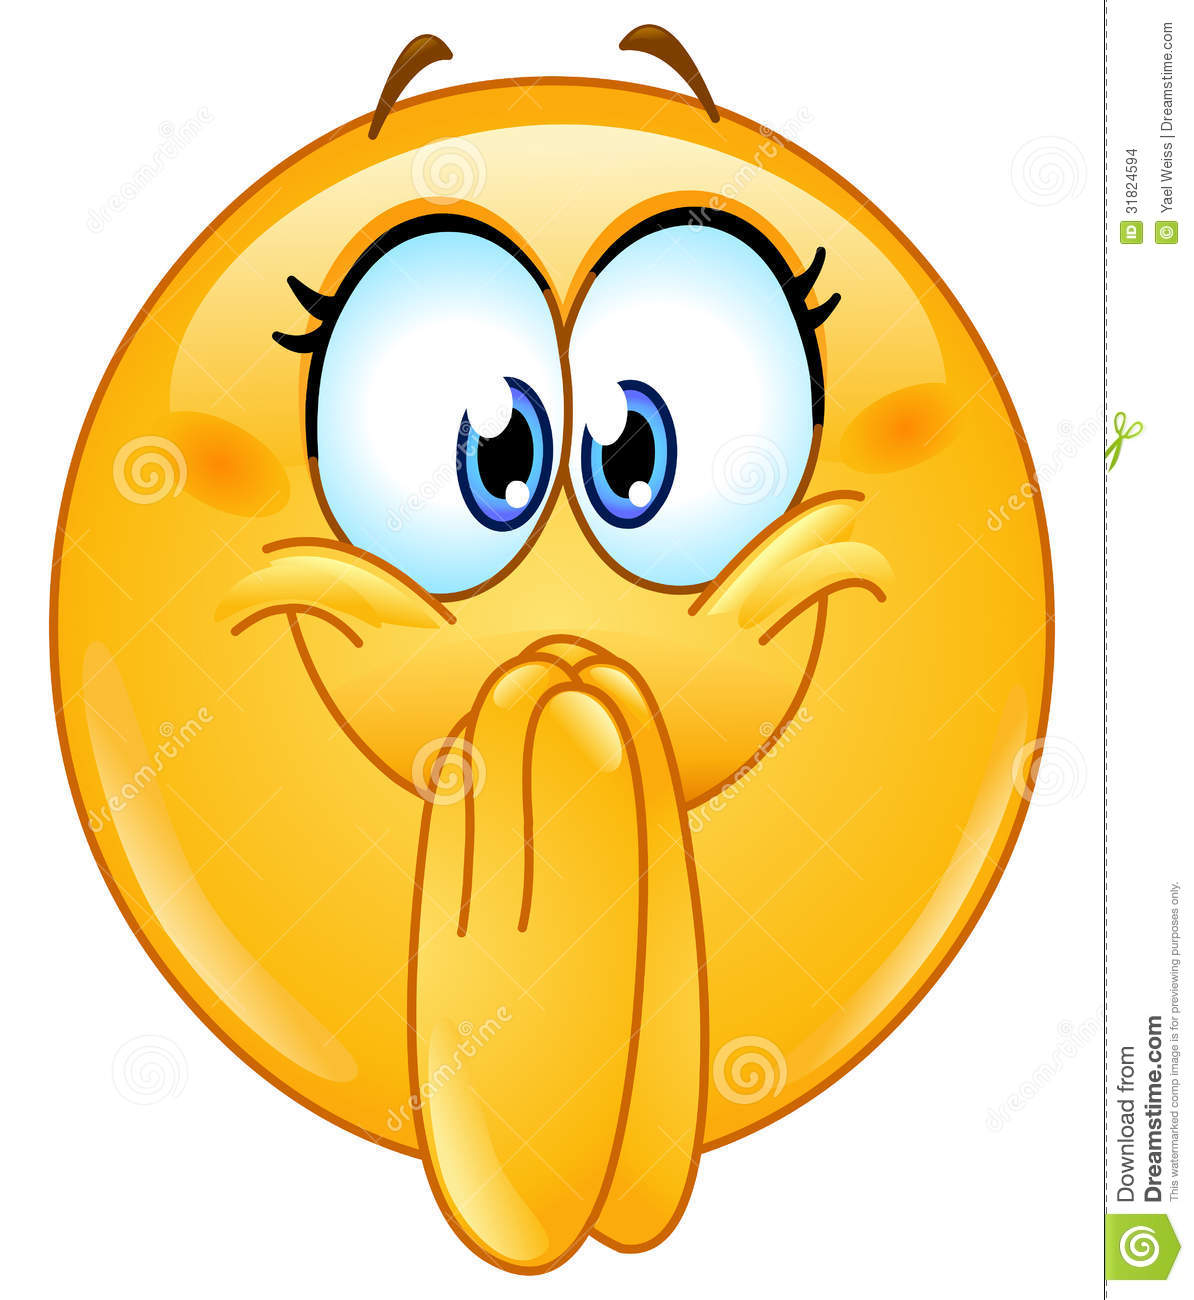 Excited Emoticon Stock Images   Image  31824594